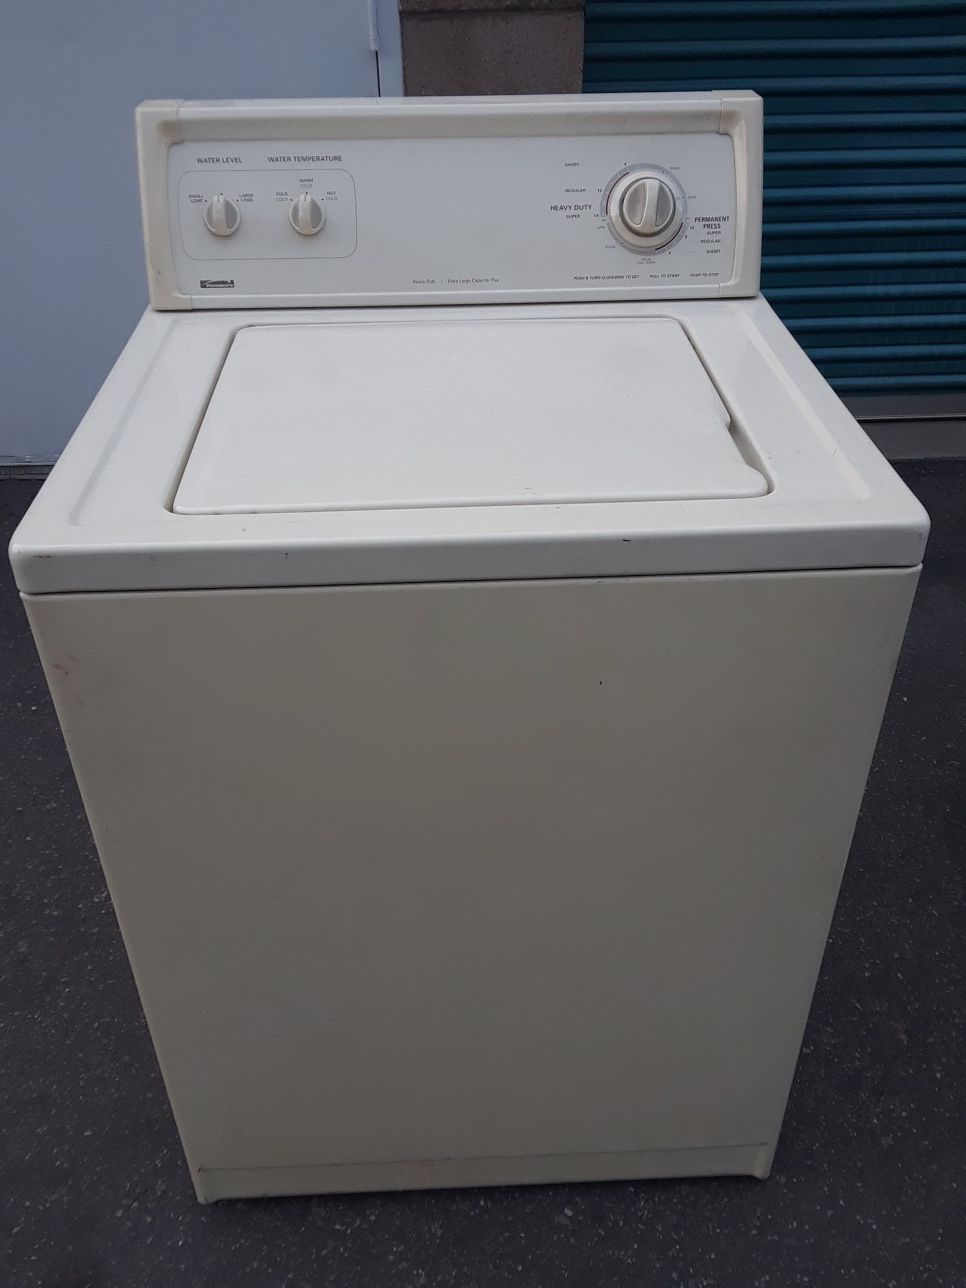 Kenmore washer "color almond "